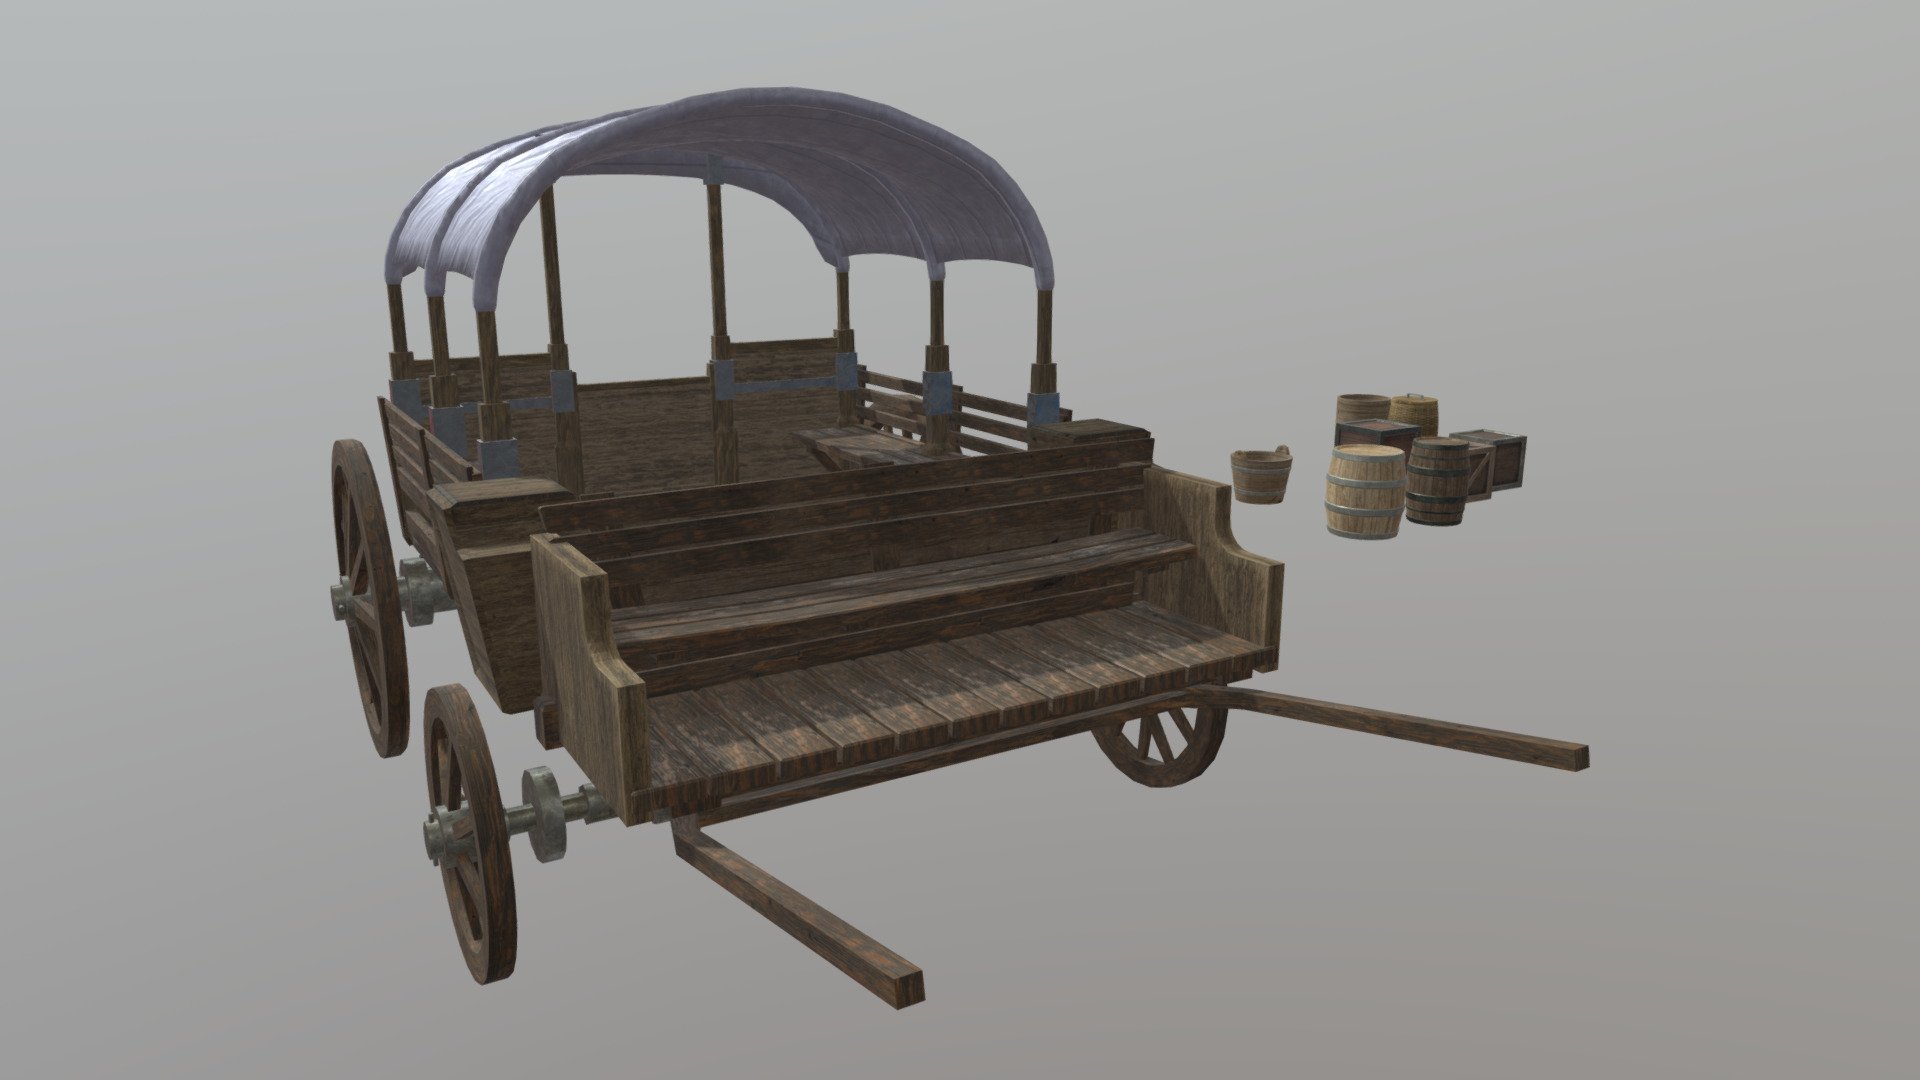 Horse Carriage and Props